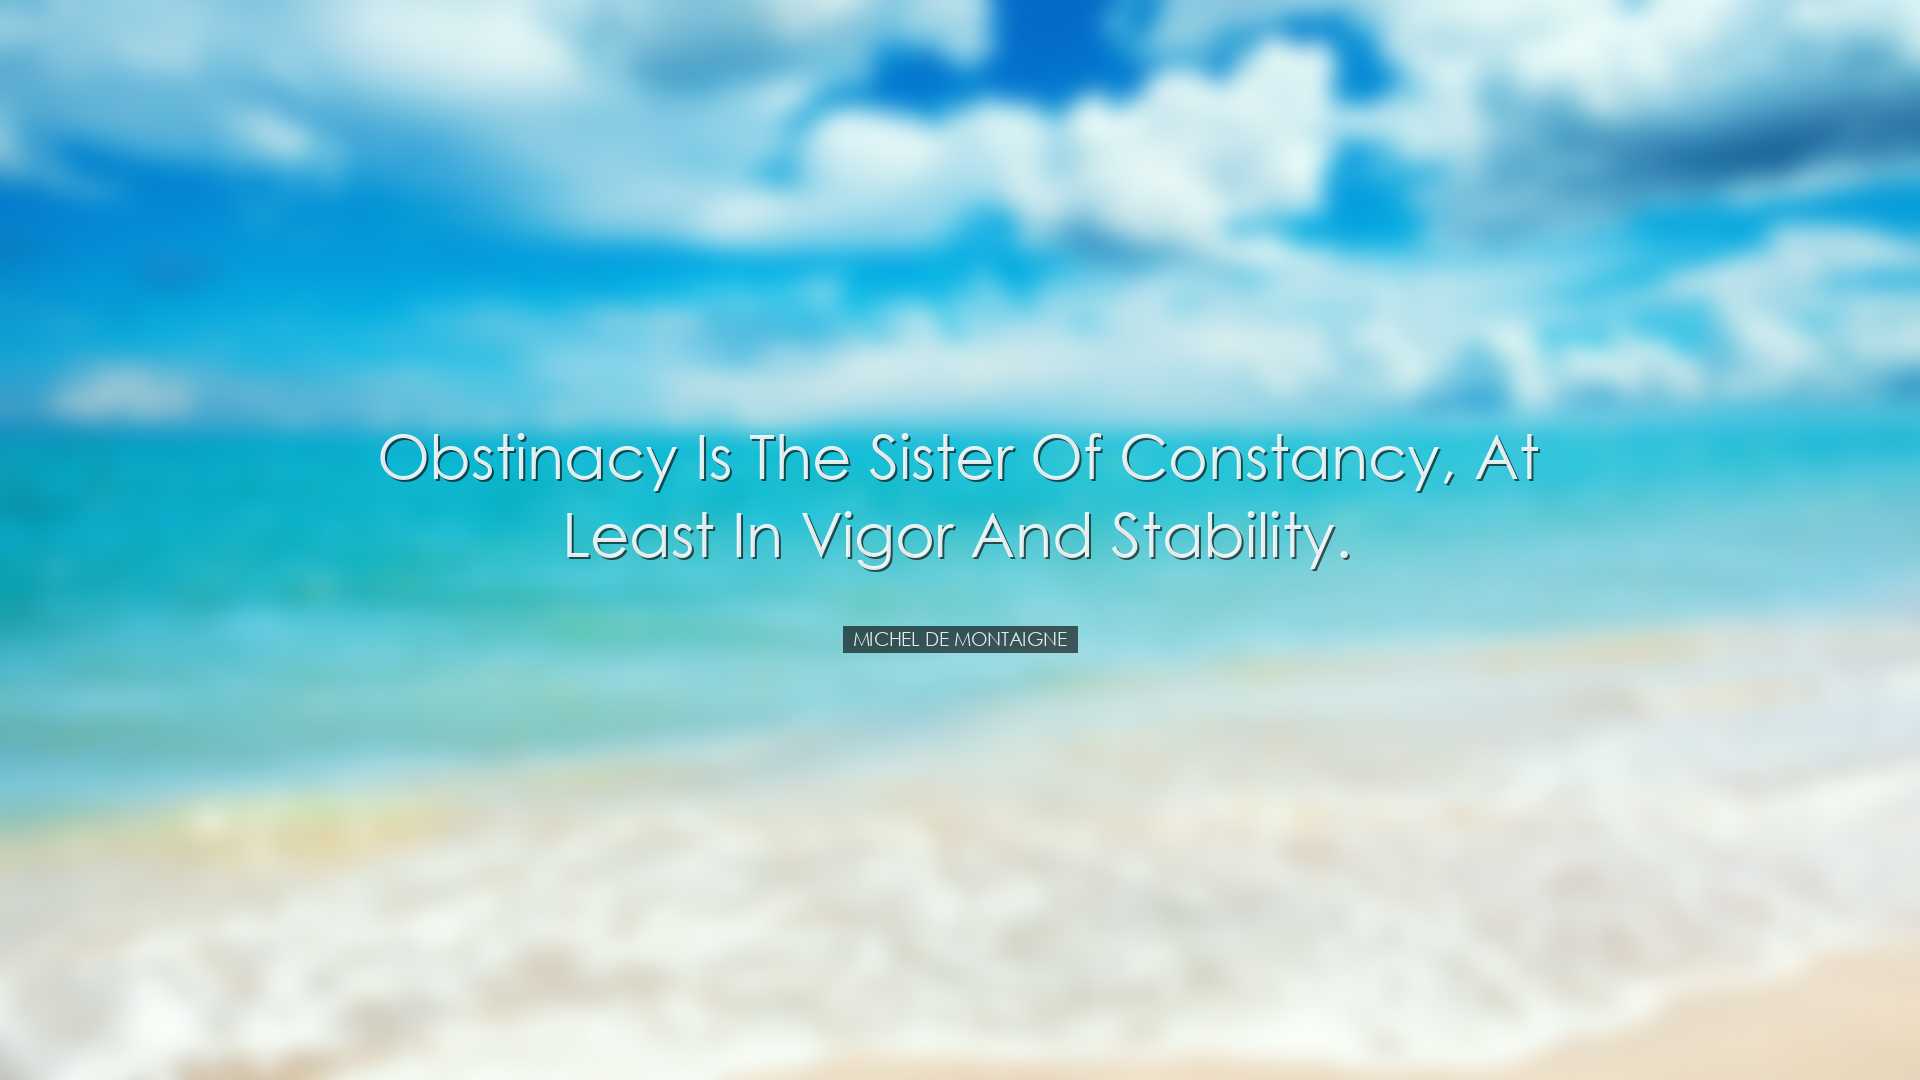 Obstinacy is the sister of constancy, at least in vigor and stabil